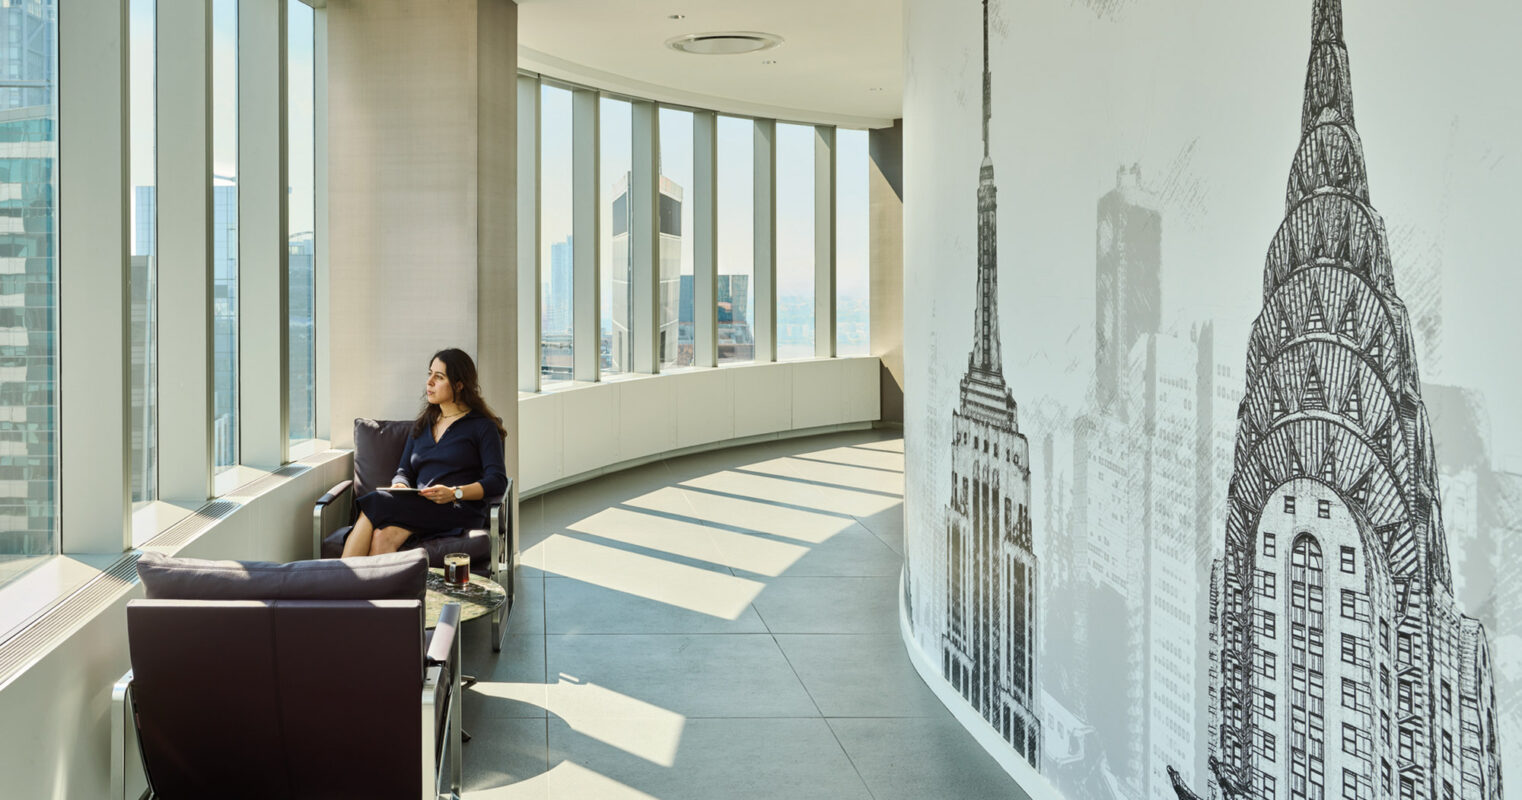 Woman enjoying a moment of contemplation in a modern office with an artistic mural of city skyscrapers on the wall, bathed in natural sunlight from expansive windows overlooking an urban skyline.